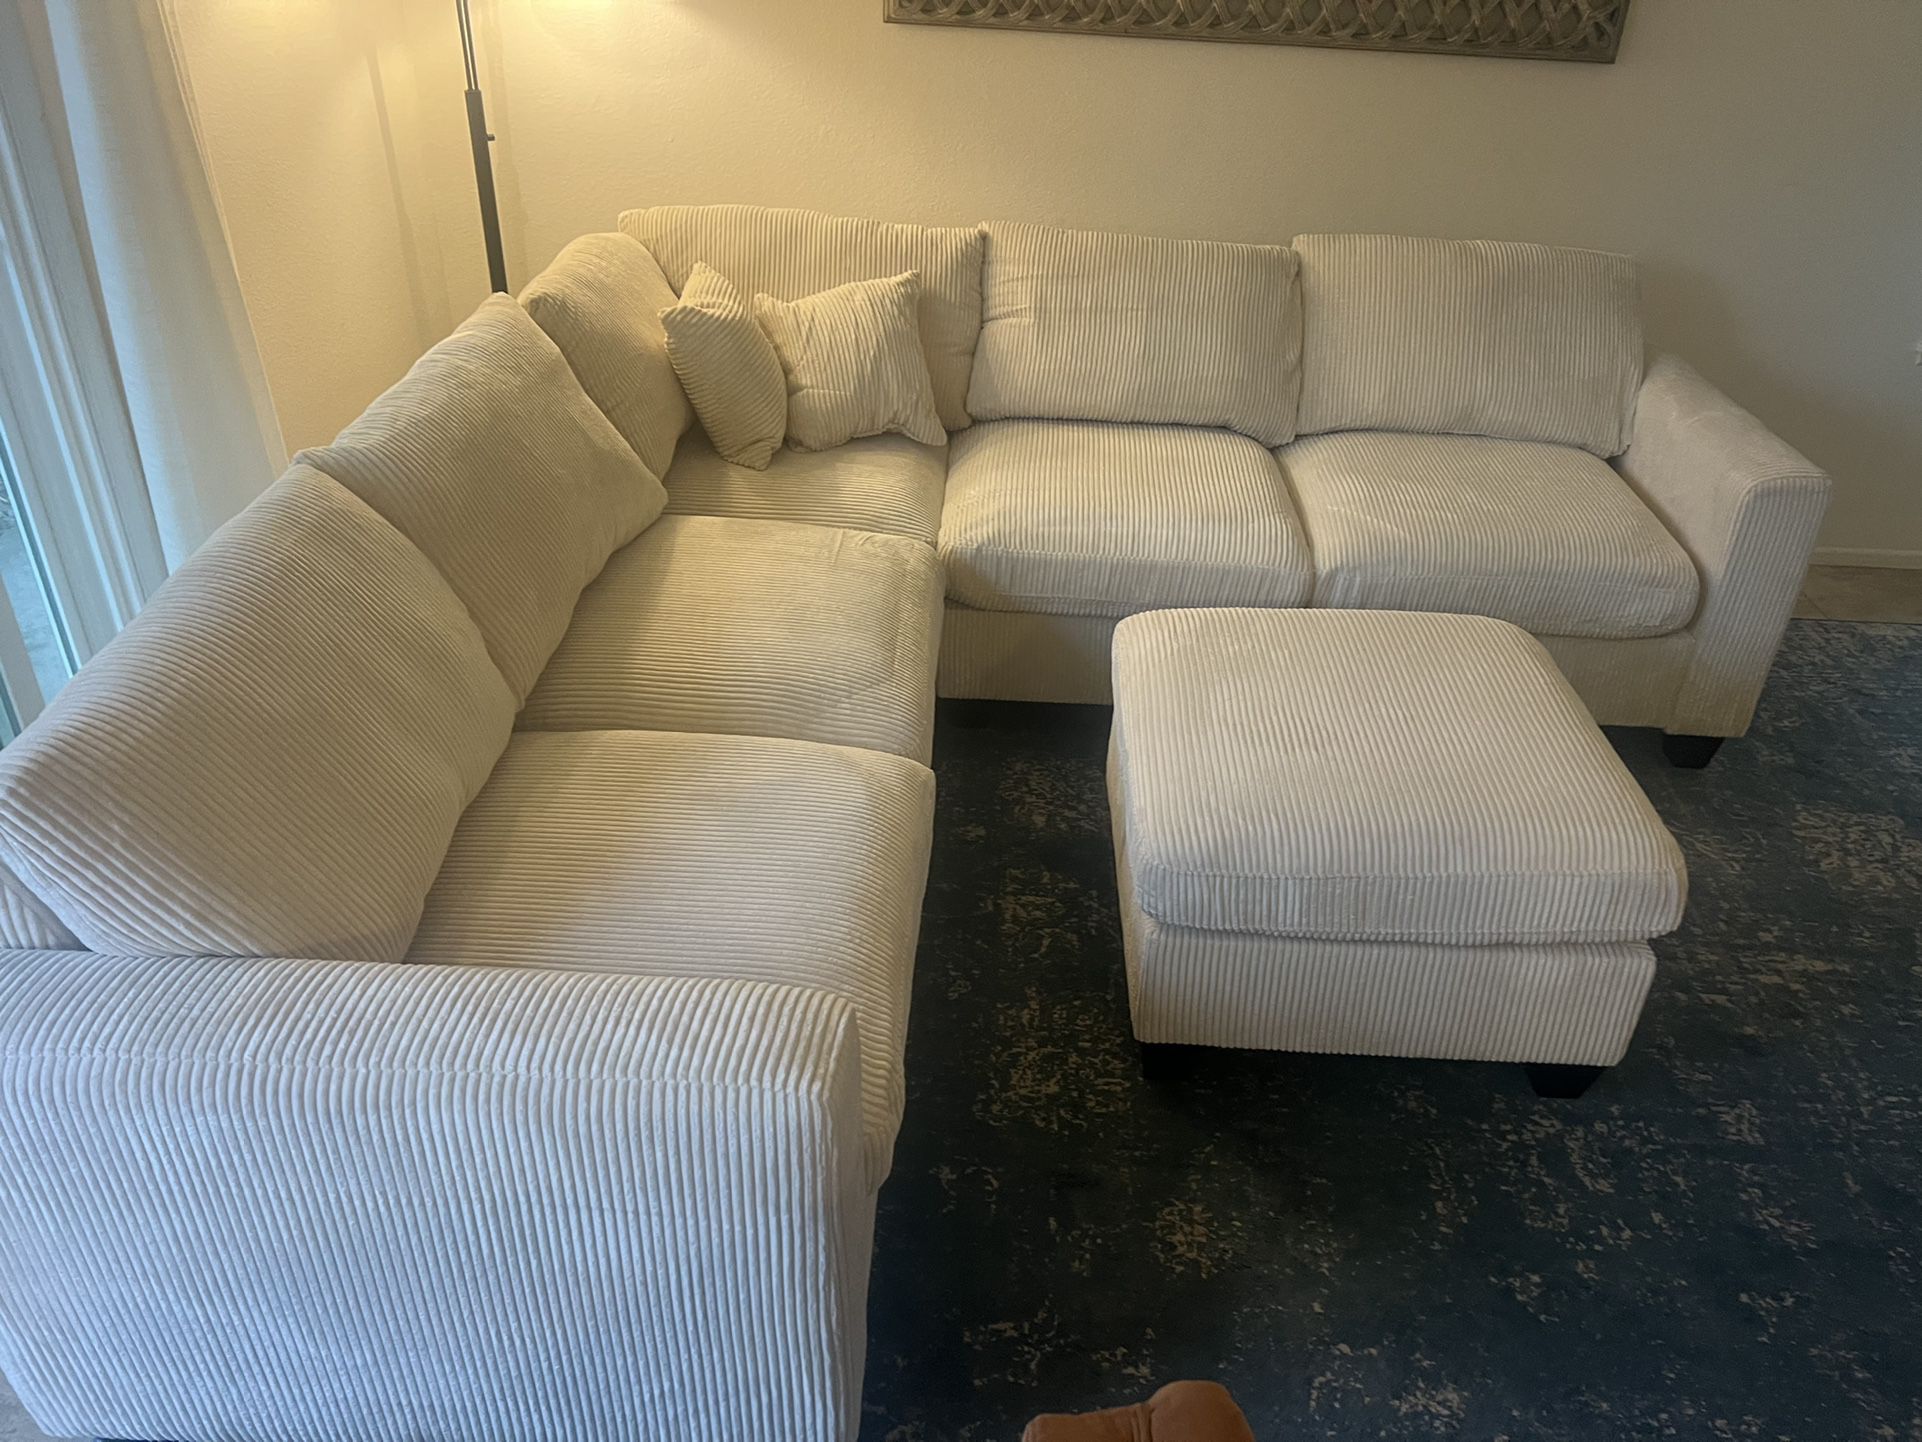 New 6 Piece Modular Sectional.  Off White / Beige.  99” X 99”.  Free Delivery!